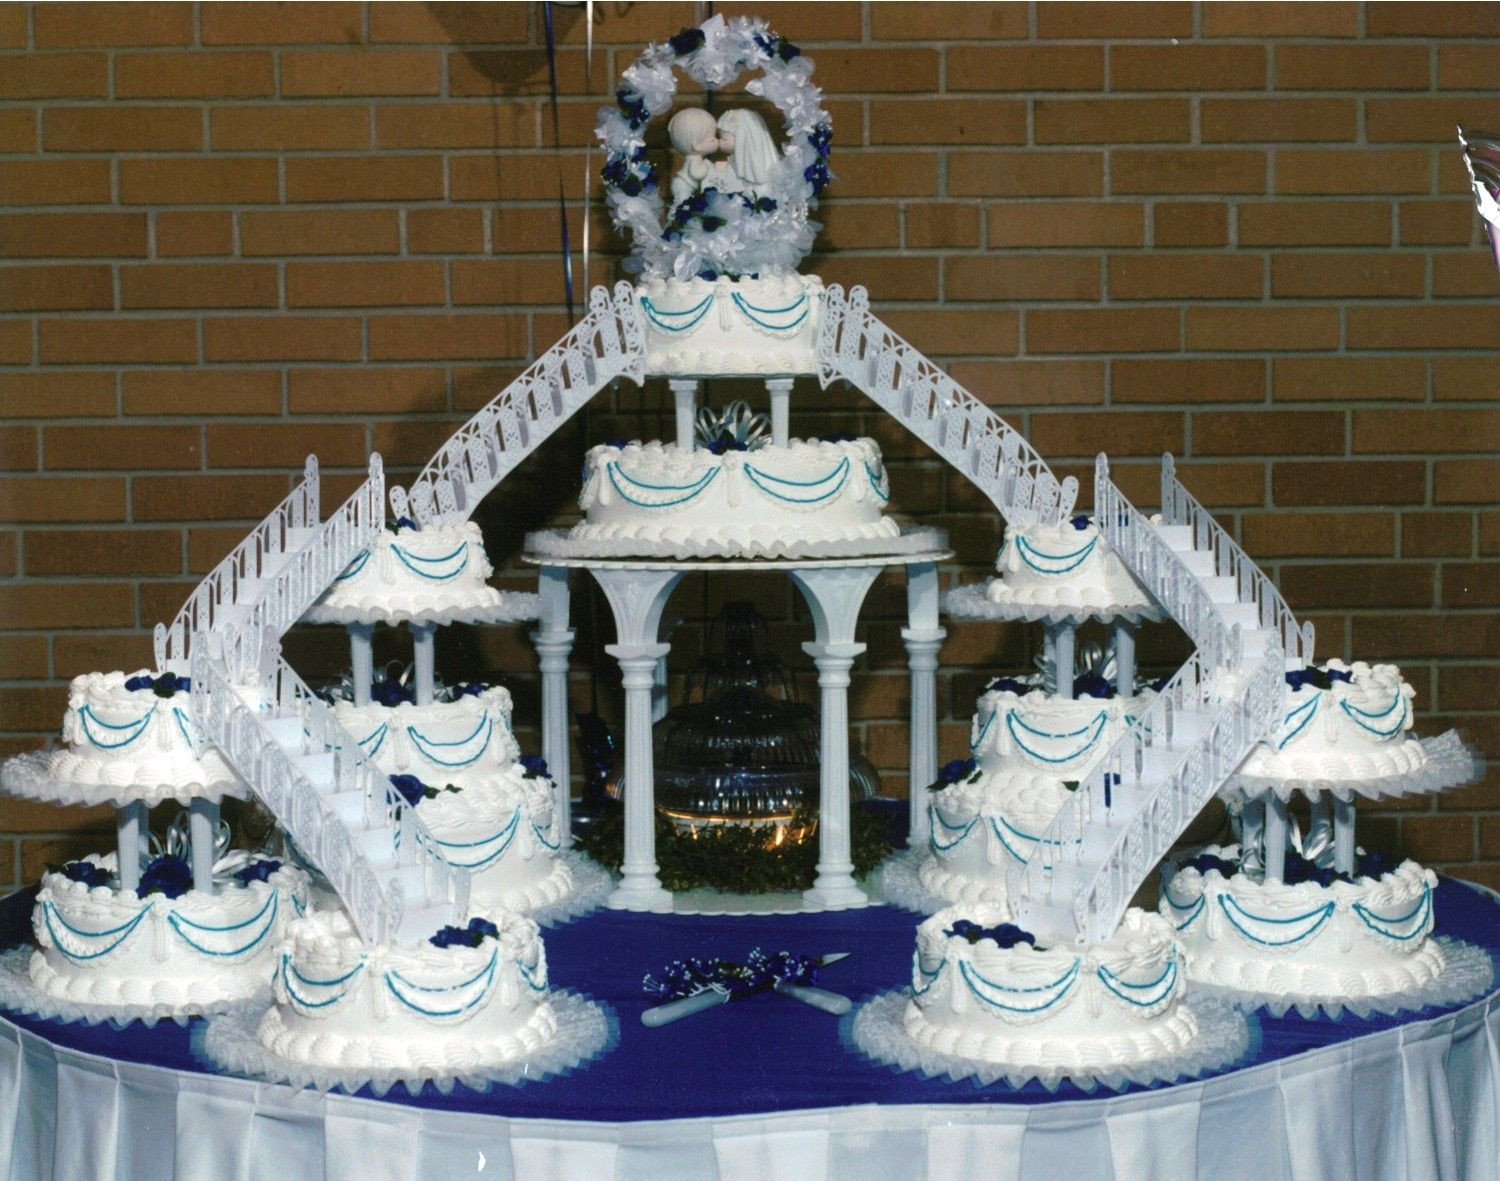 Wedding Cakes With Fountains And Bridges
 mc arthurs wedding cake with fountains and bridges with a